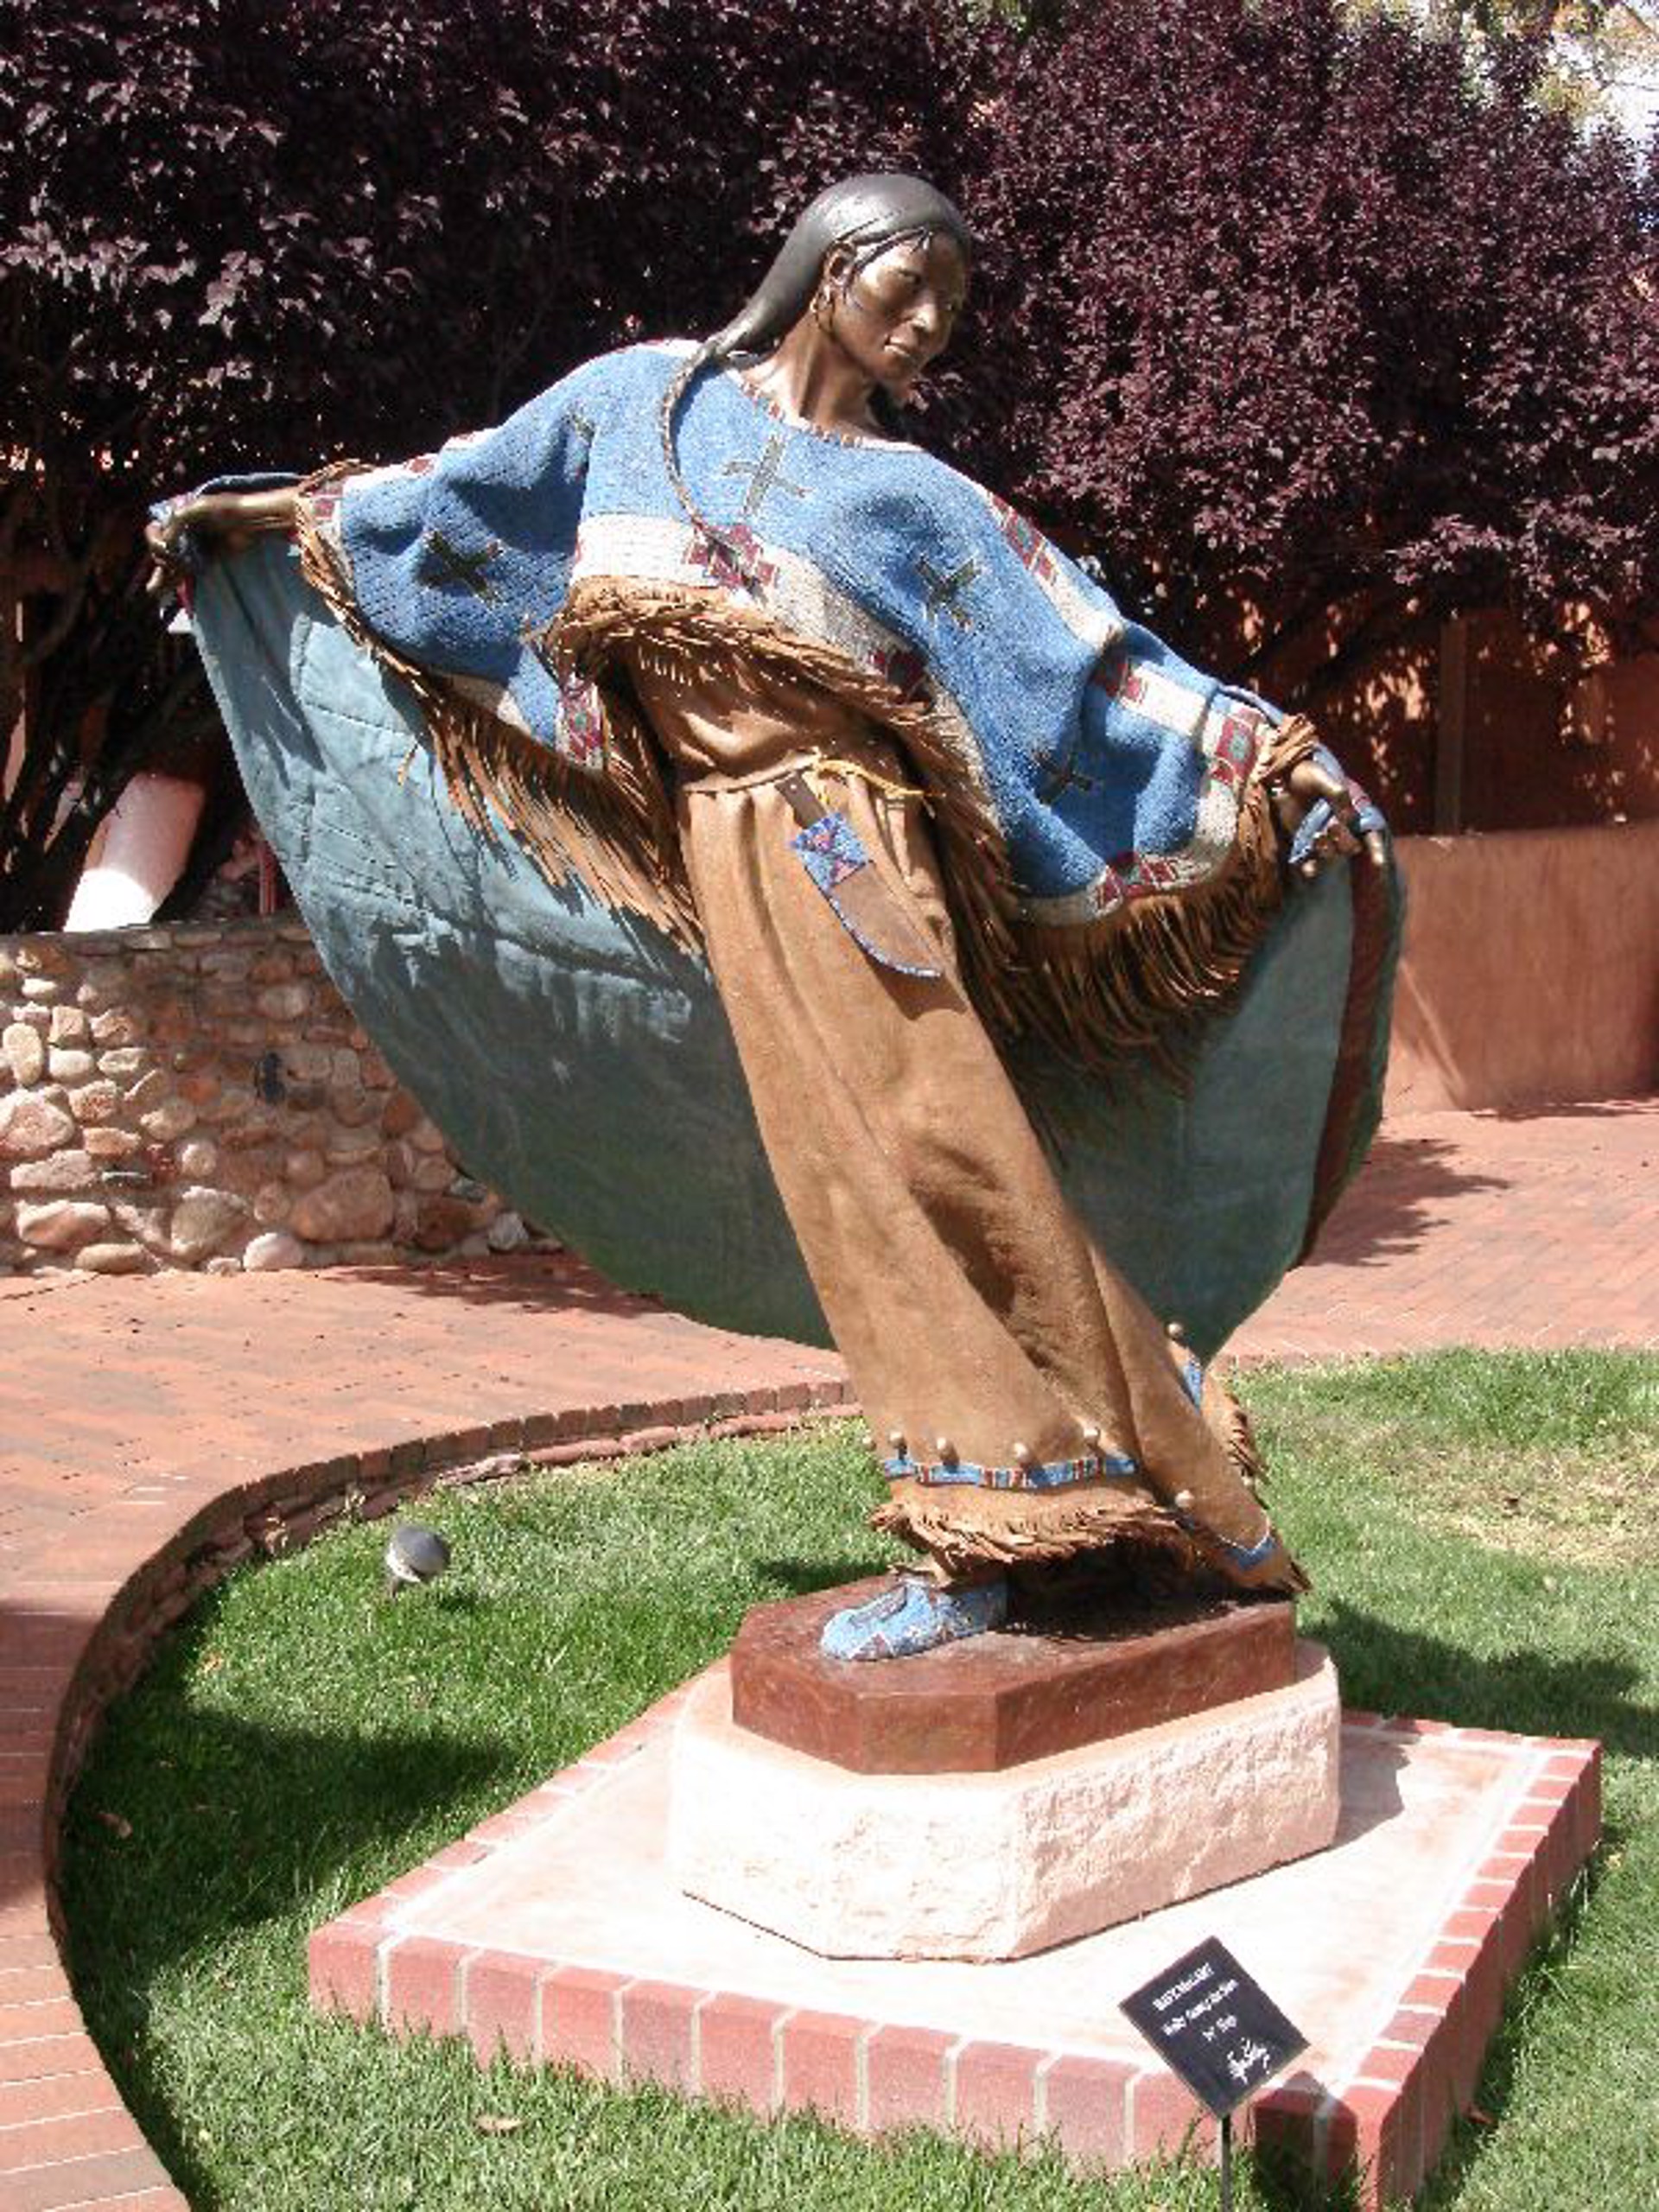 Walks Among the Stars (lifesize) by Dave McGary (sculptor) (1958-2013)